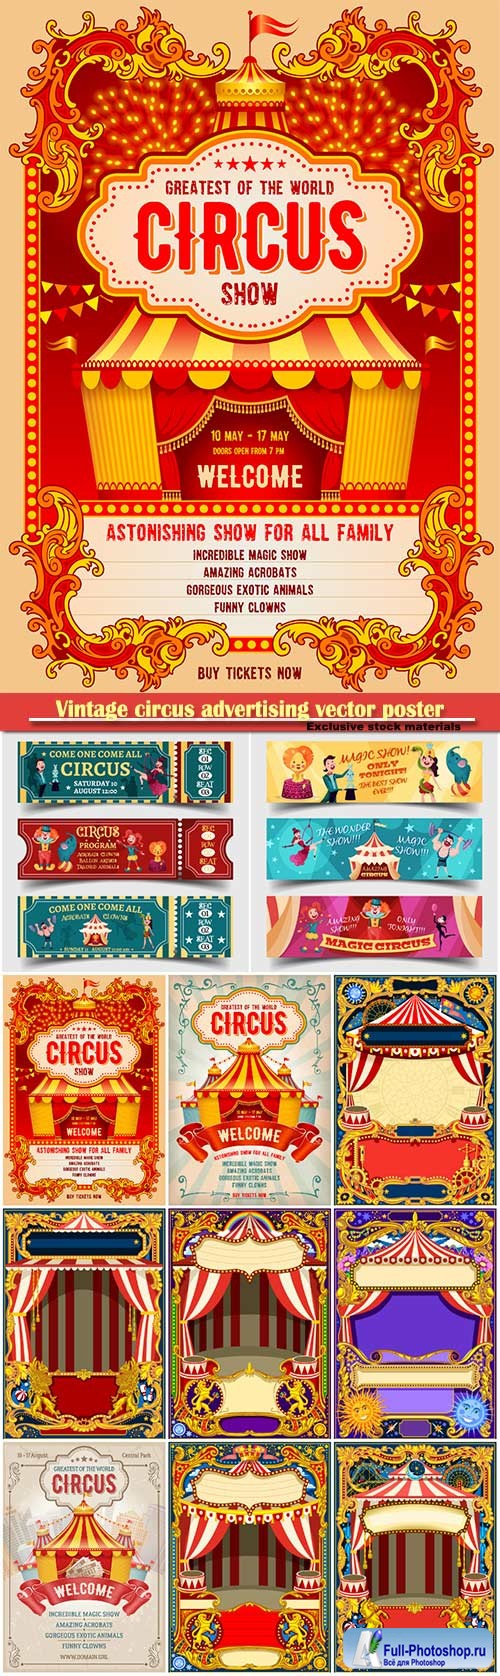 Vintage circus advertising vector poster or flyer with big circus marquee